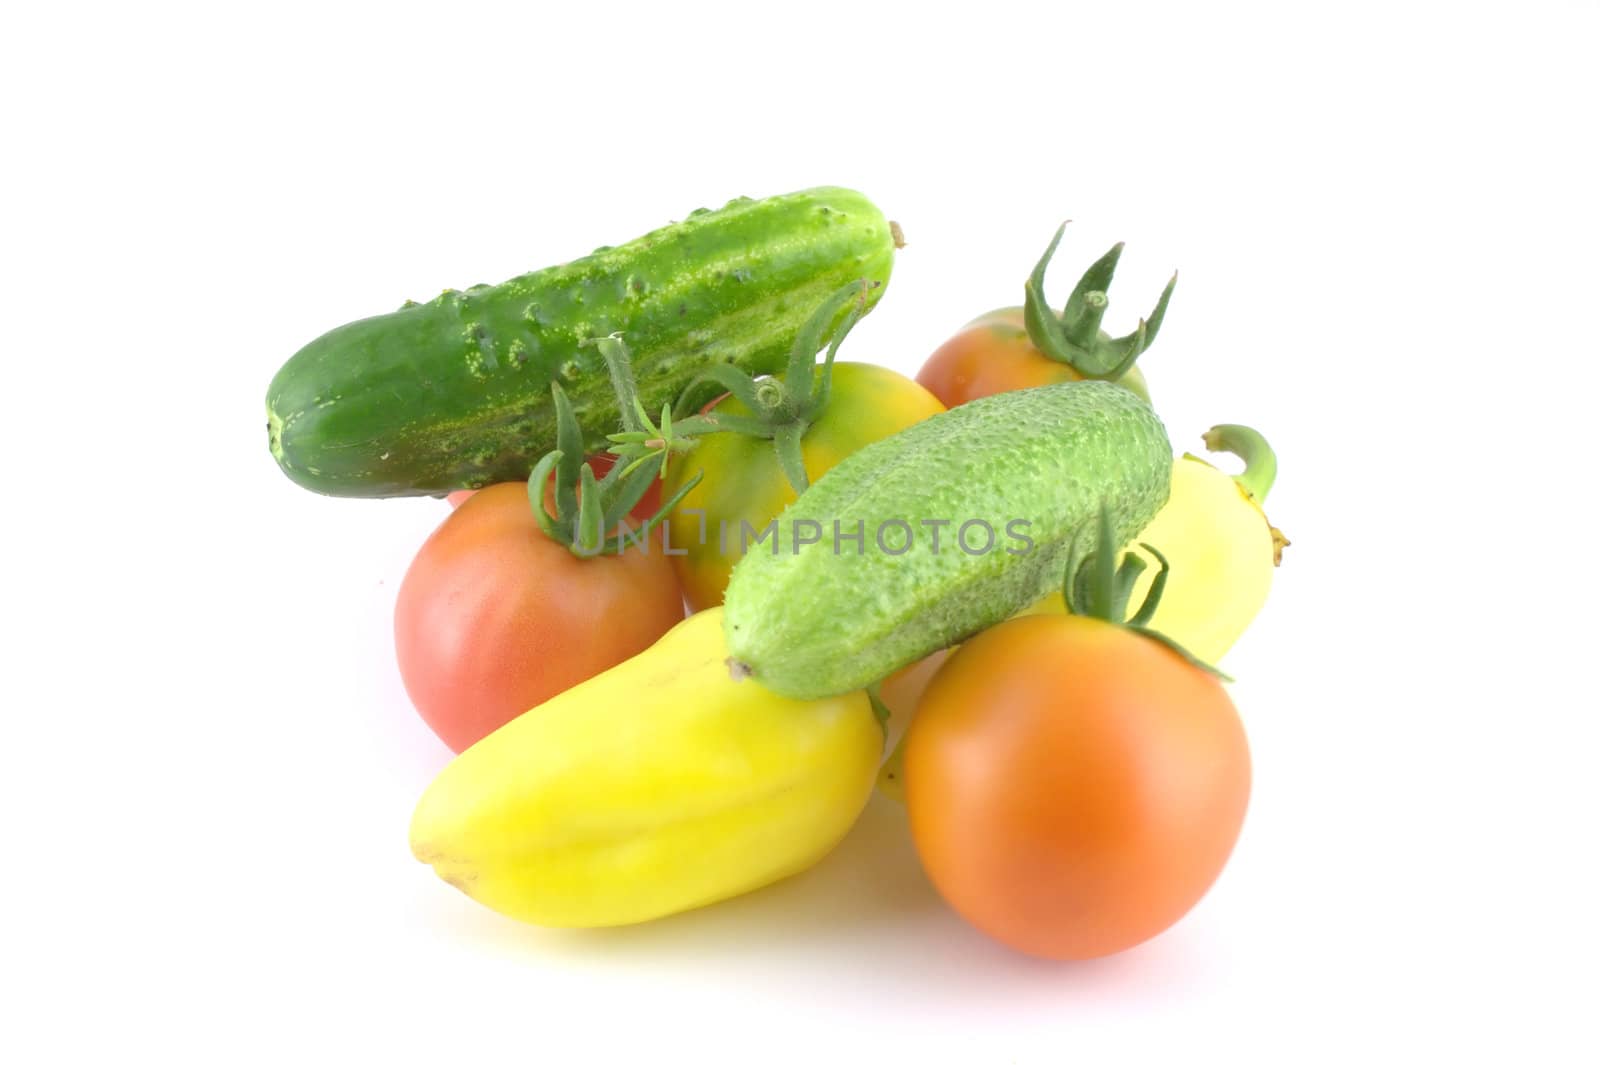 Cucumbers, tomatoes and peppers by sergpet